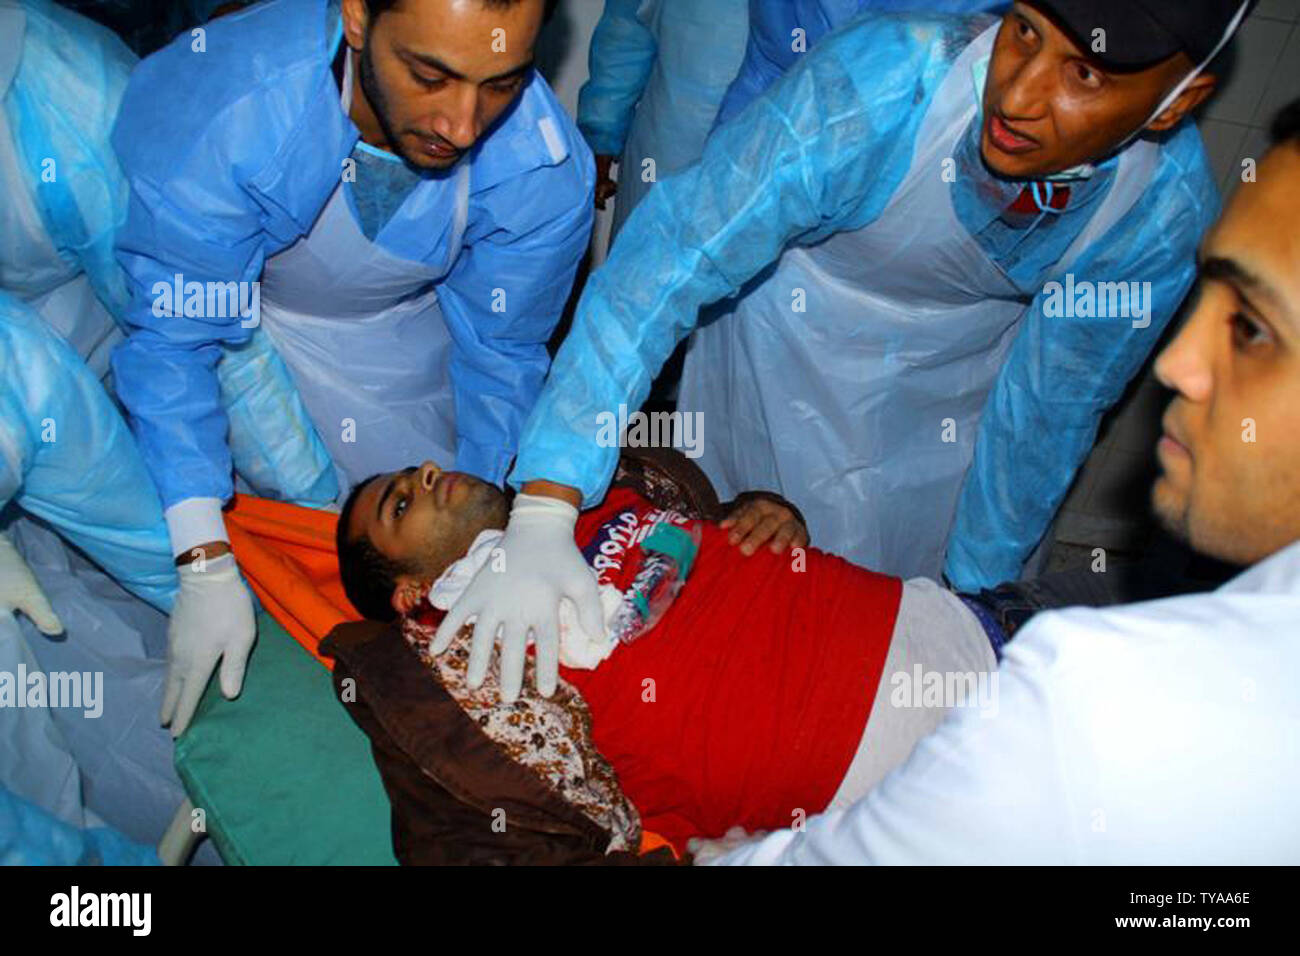 Medics treat a wounded person at a hospital in Benghazi, Libya, on February 25, 2011. Euphoria in Libya's second city Benghazi gave way to growing concern that it remains vulnerable to a counter-attack by Gaddafi's forces.   UPI Stock Photo